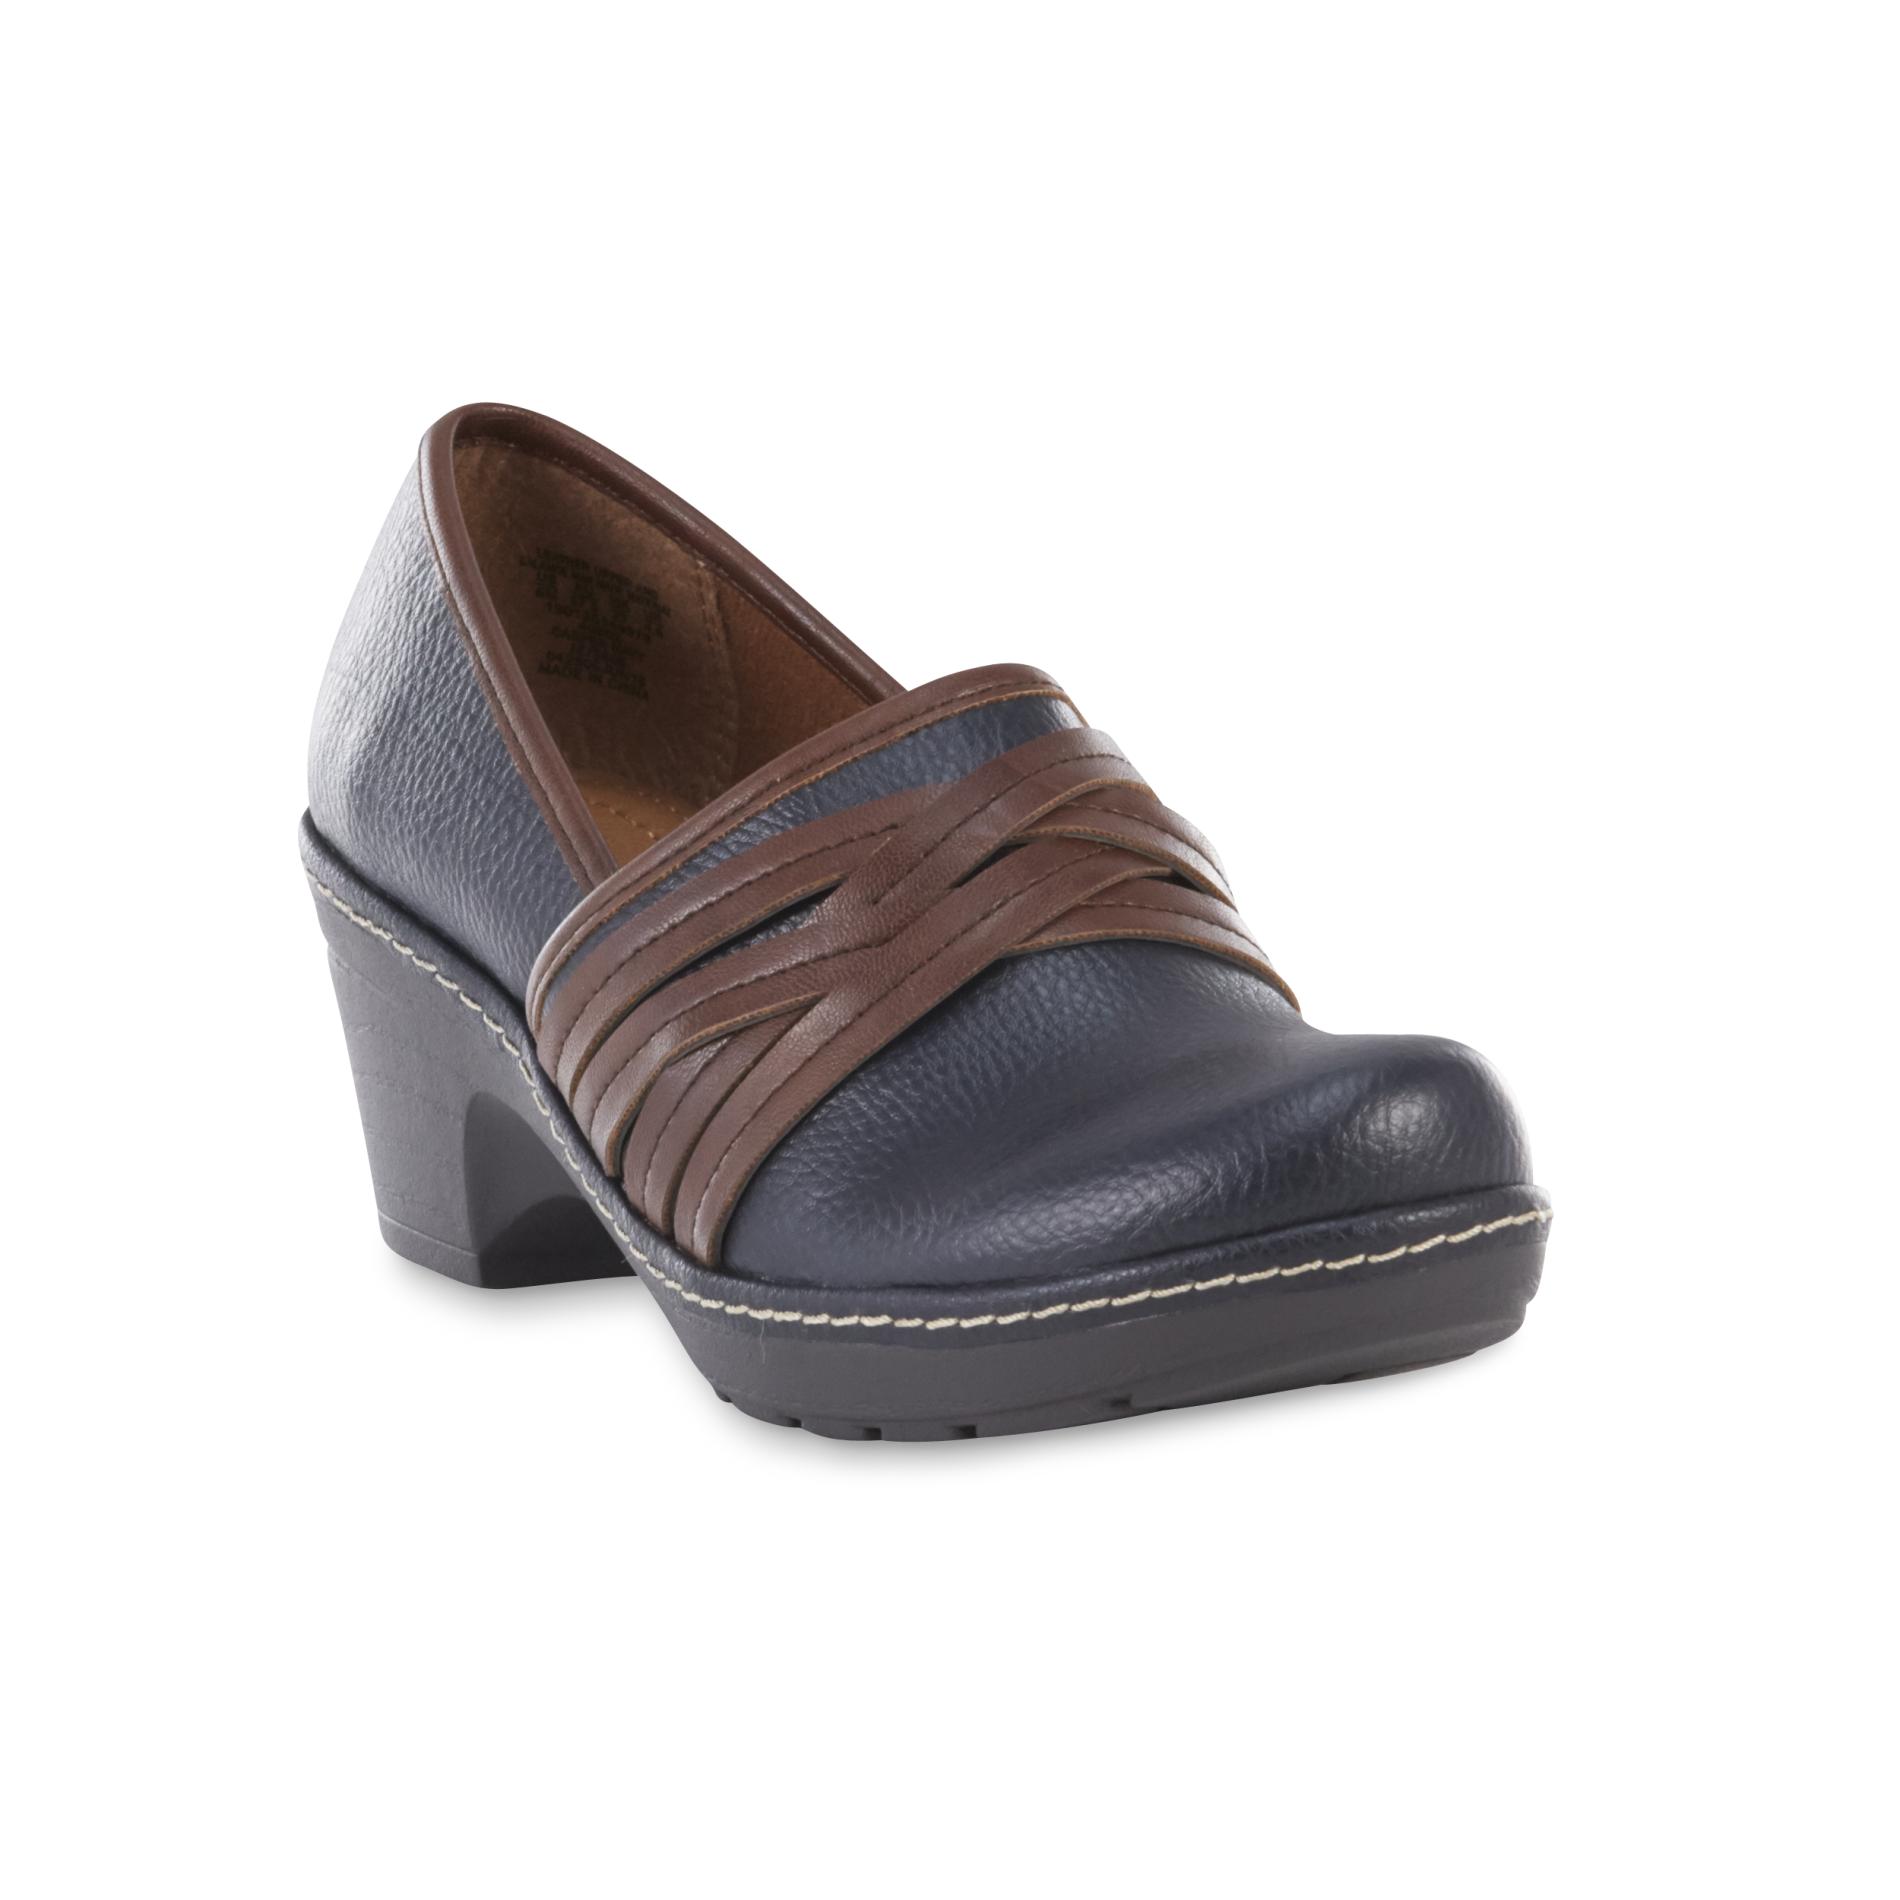 Thom McAn Women's Casper Black/Brown Leather Clog - Wide Width Available